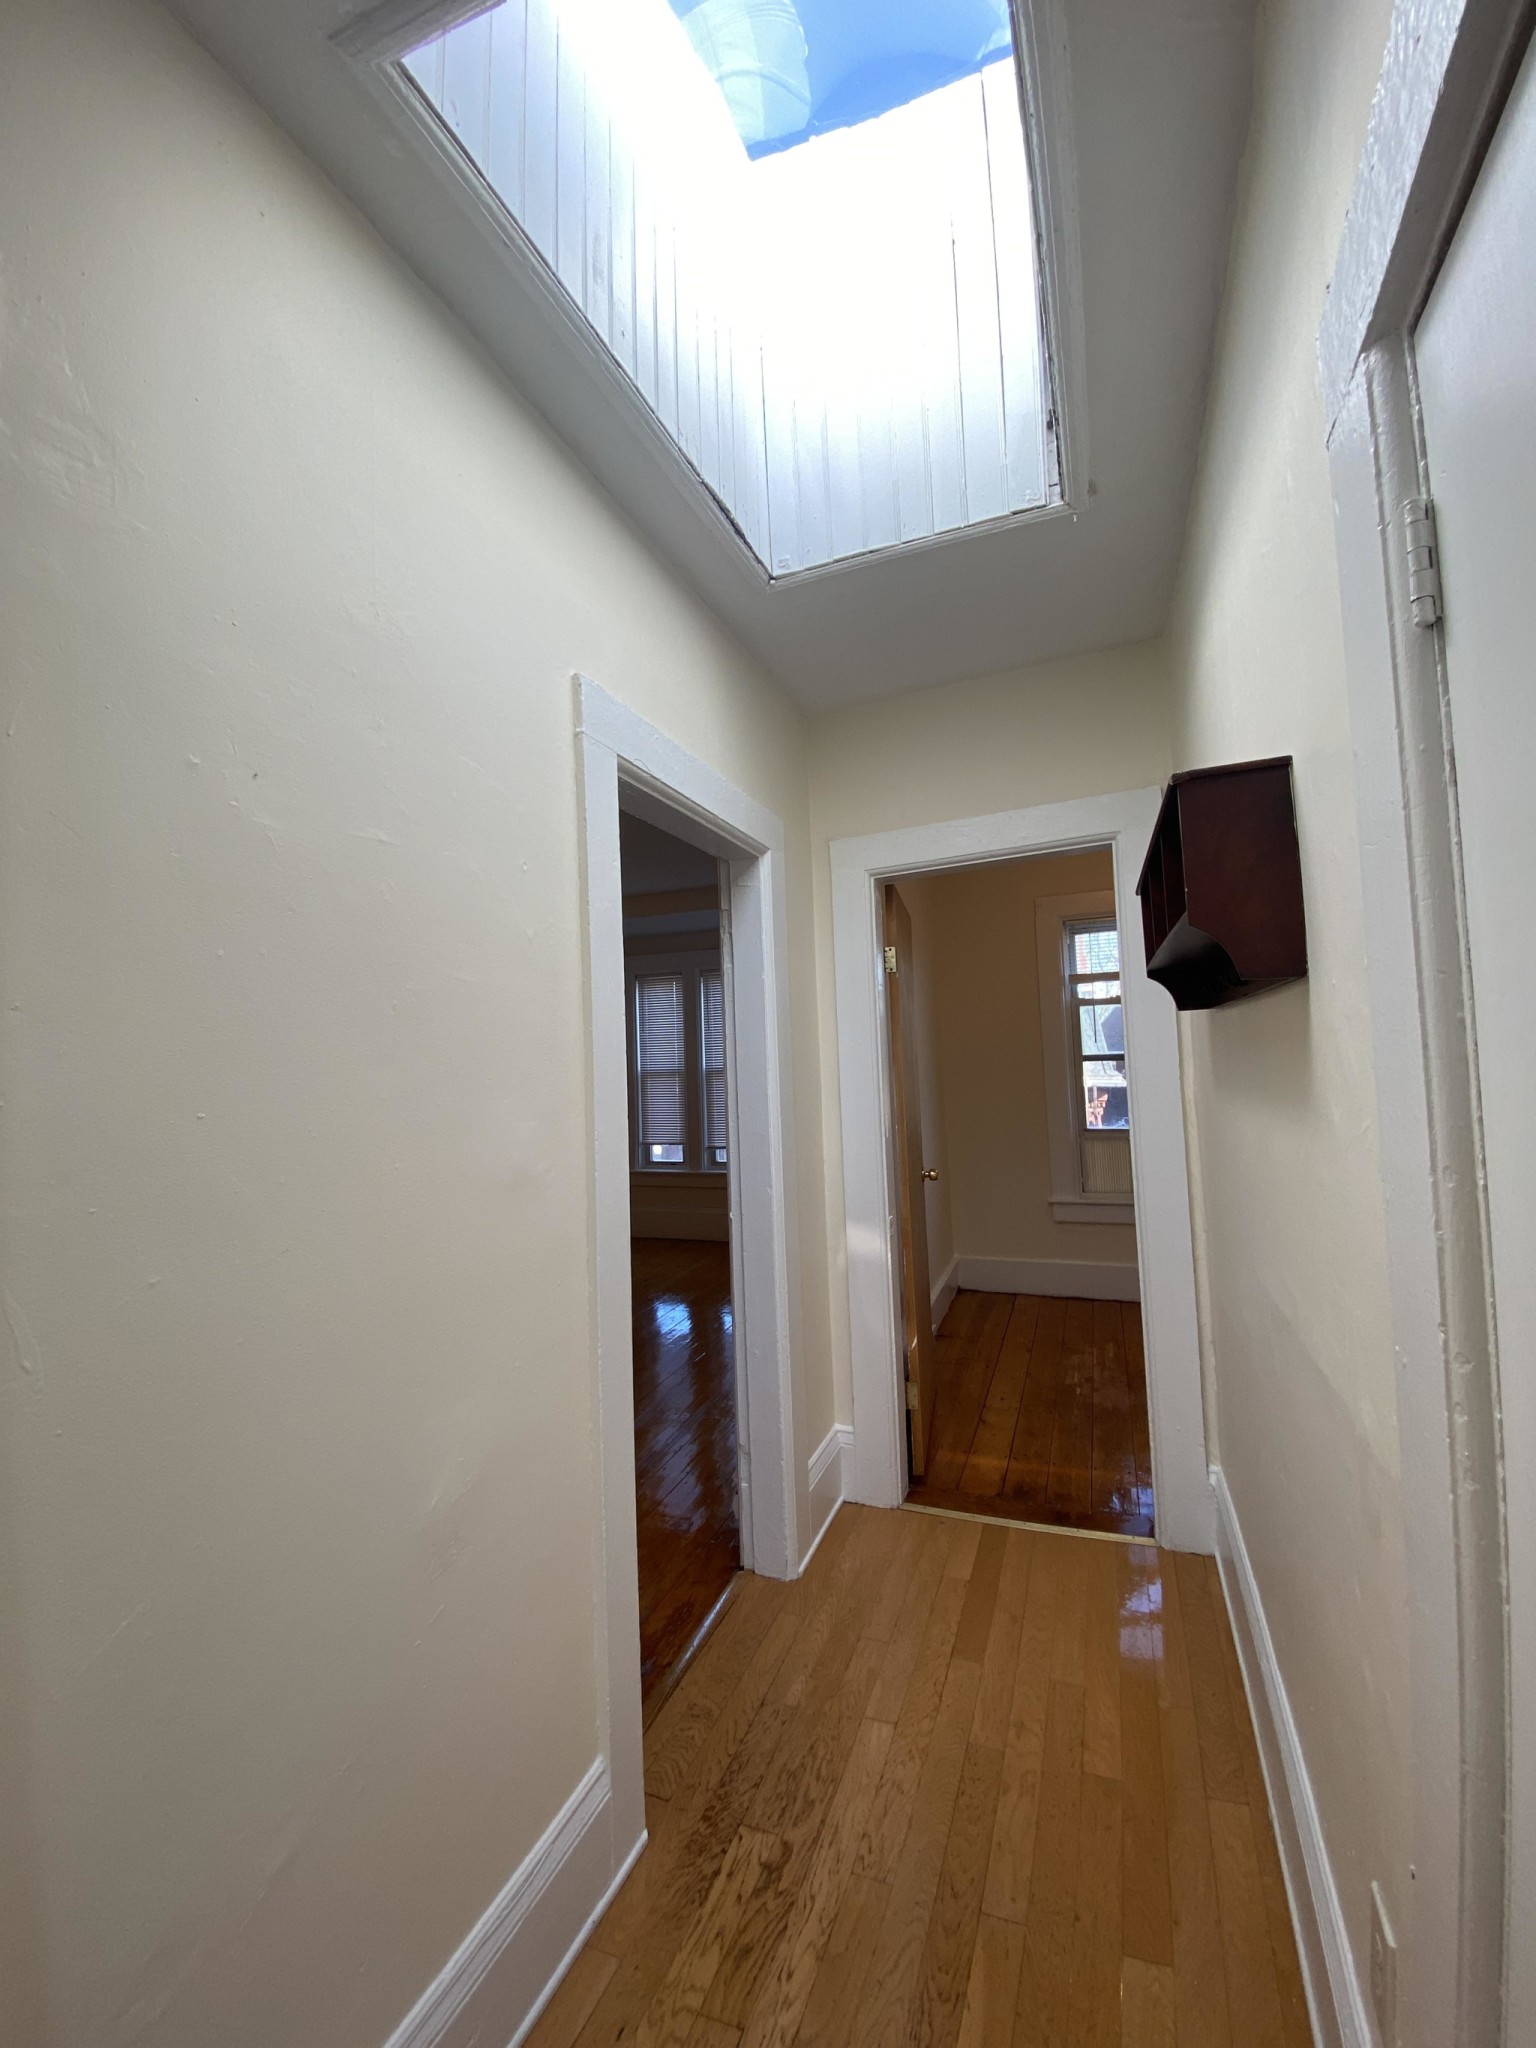 Photos of apartment on Florence St.,Somerville MA 02143